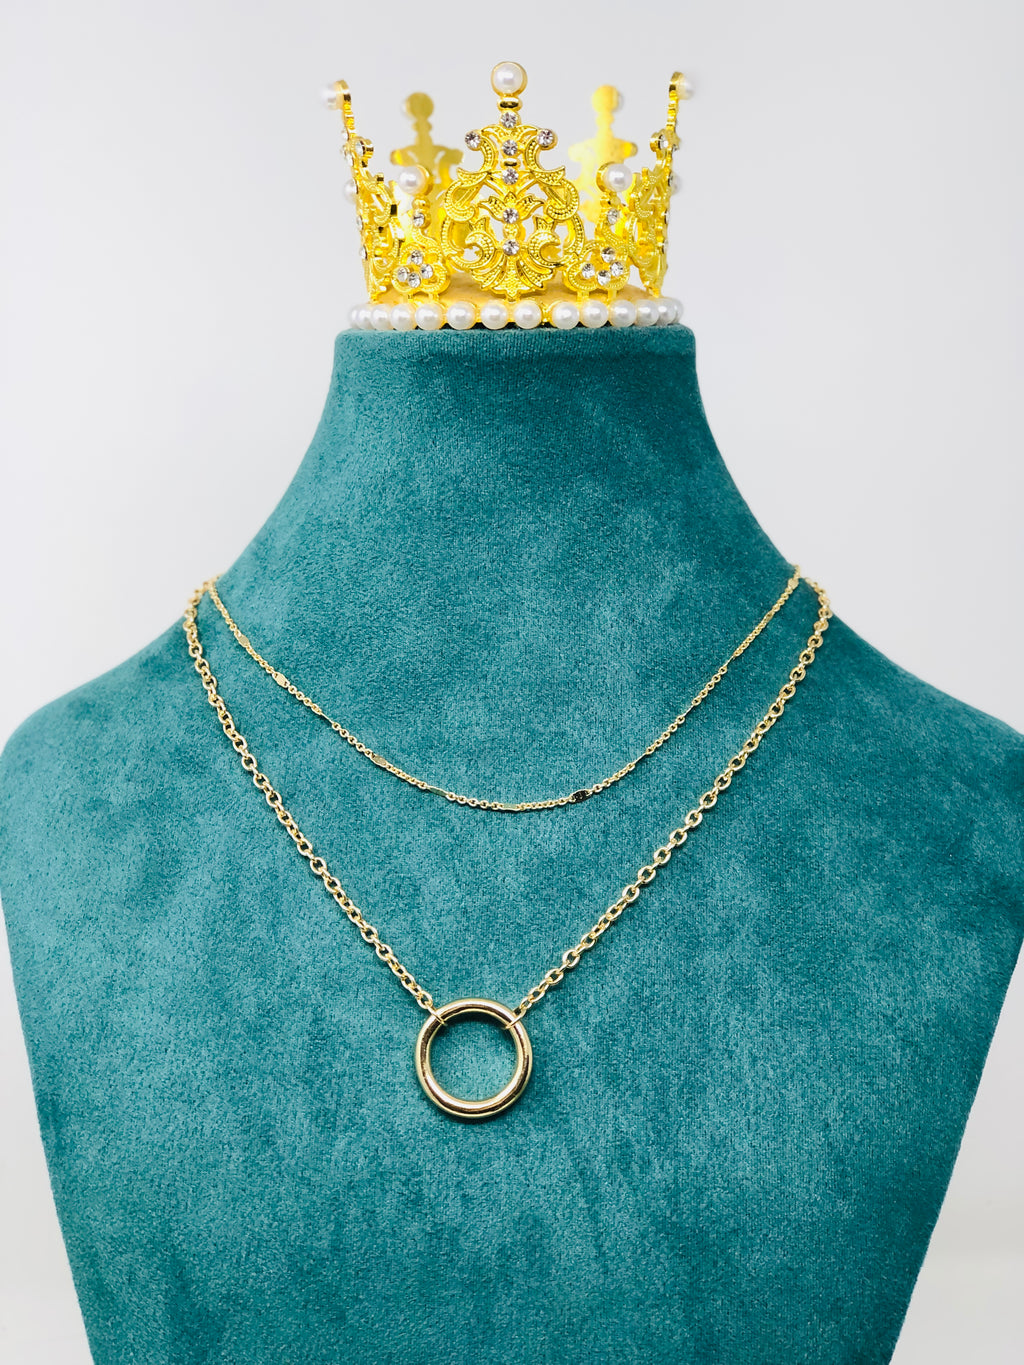 Gold Chain w/Ring Necklace